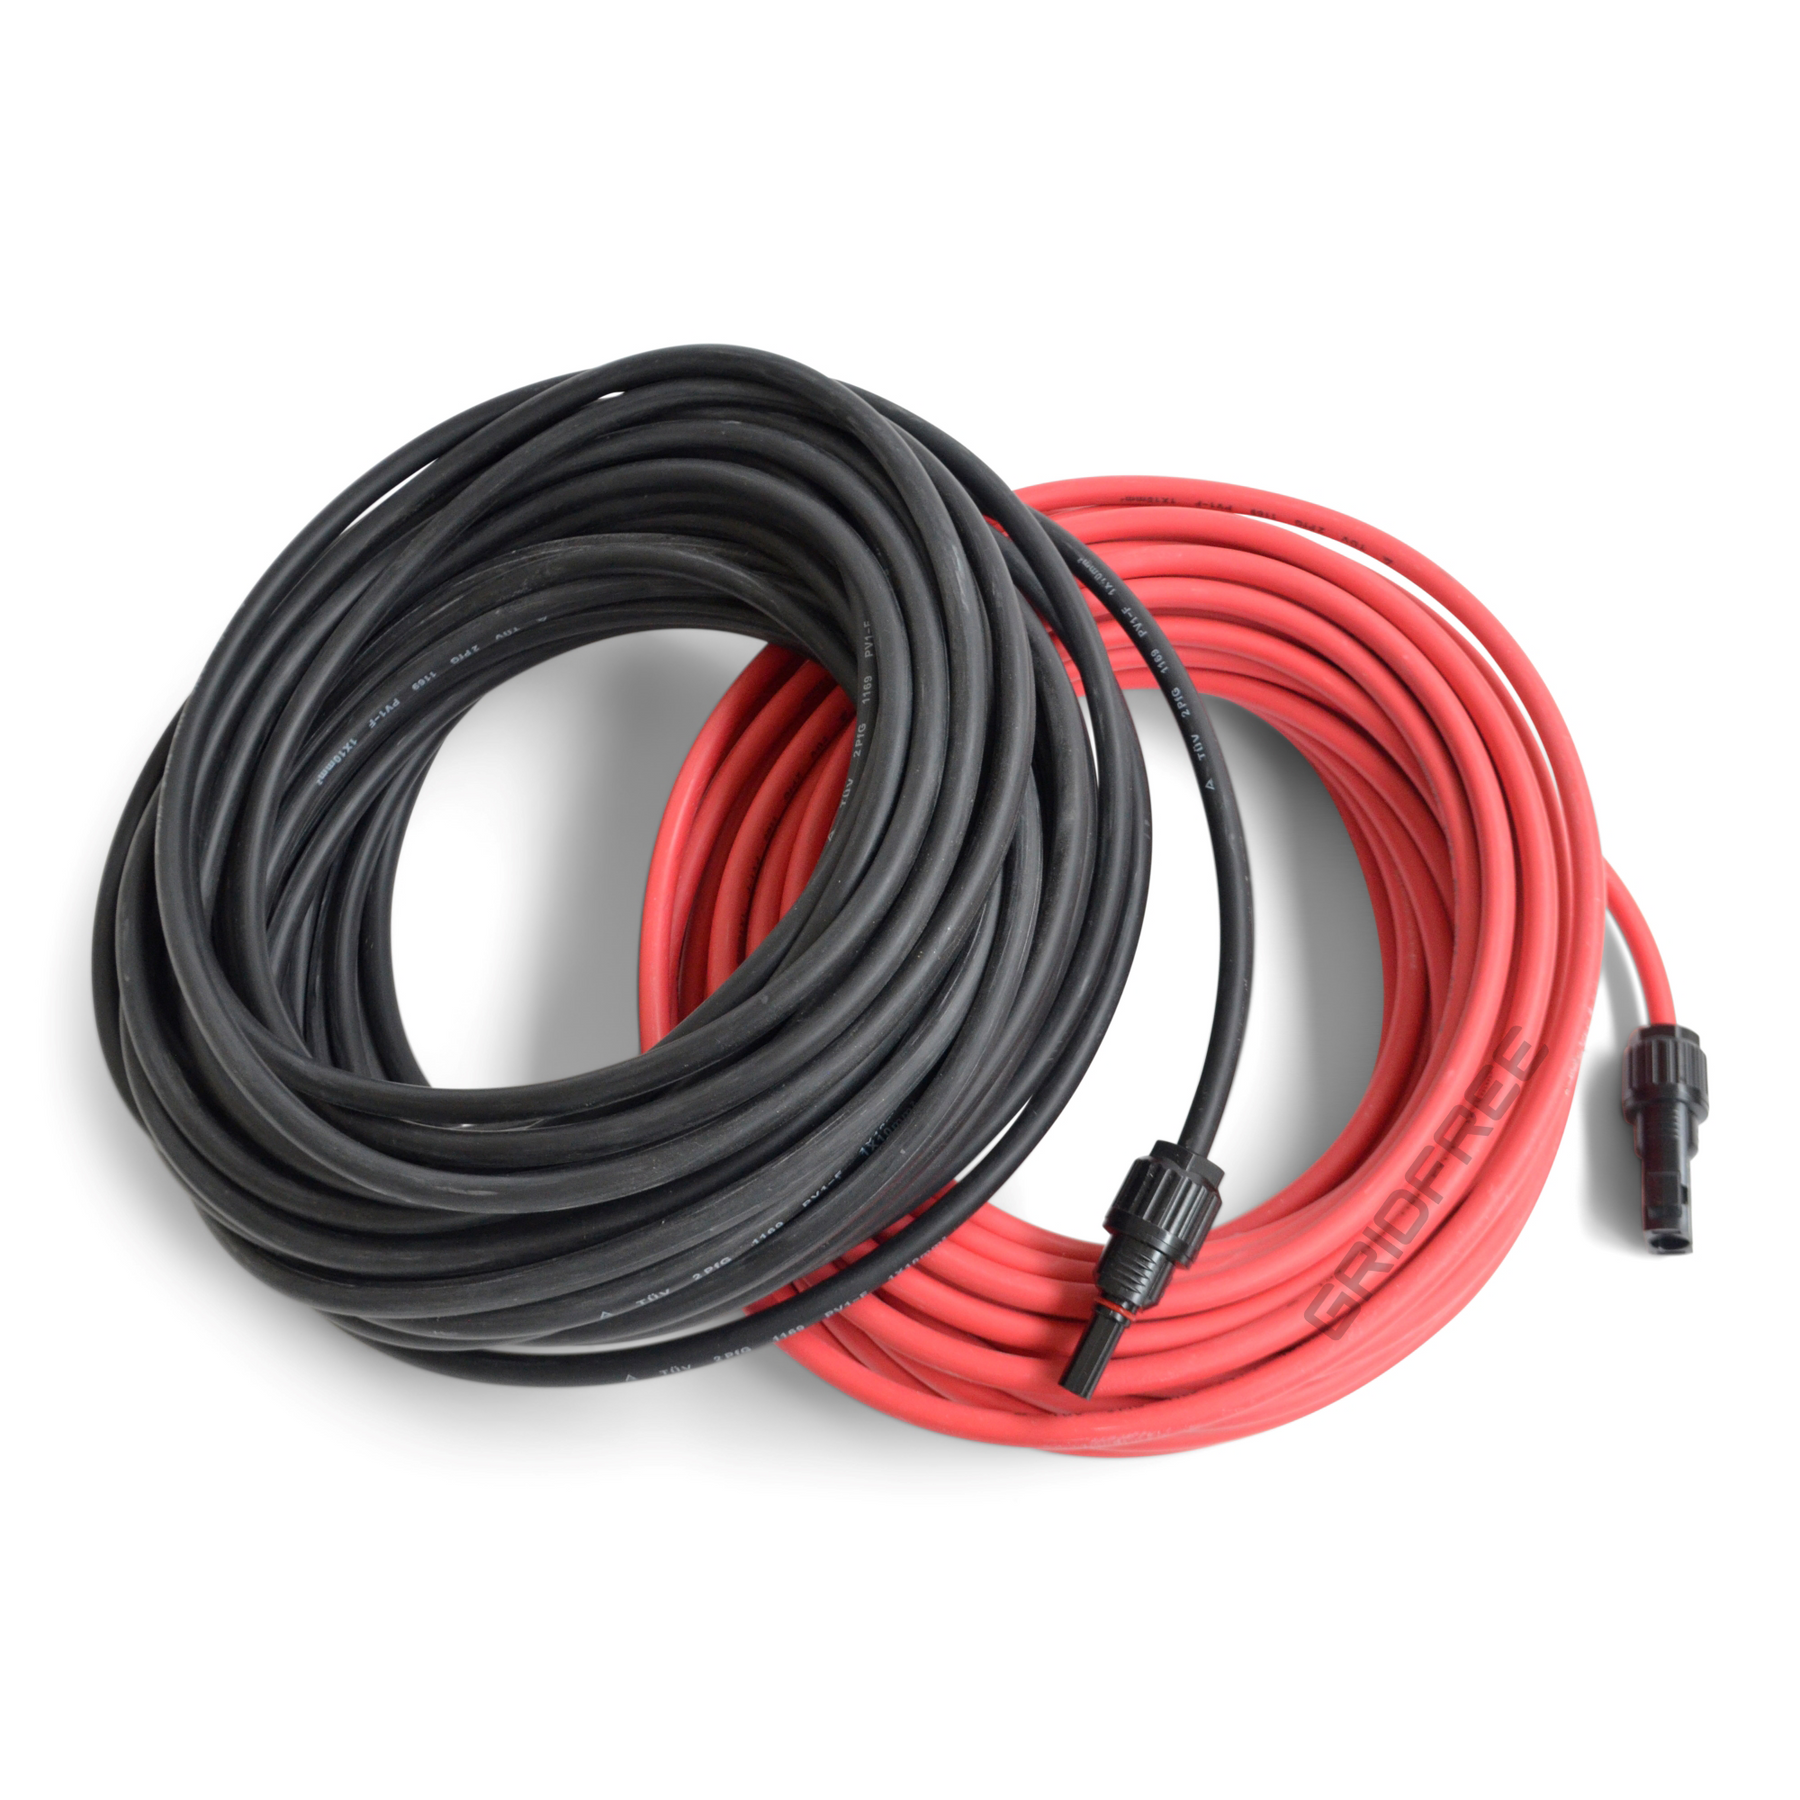 50M 6mm2 PV Wire MC4 Cable 10AWG TUV Proved - Red&Black